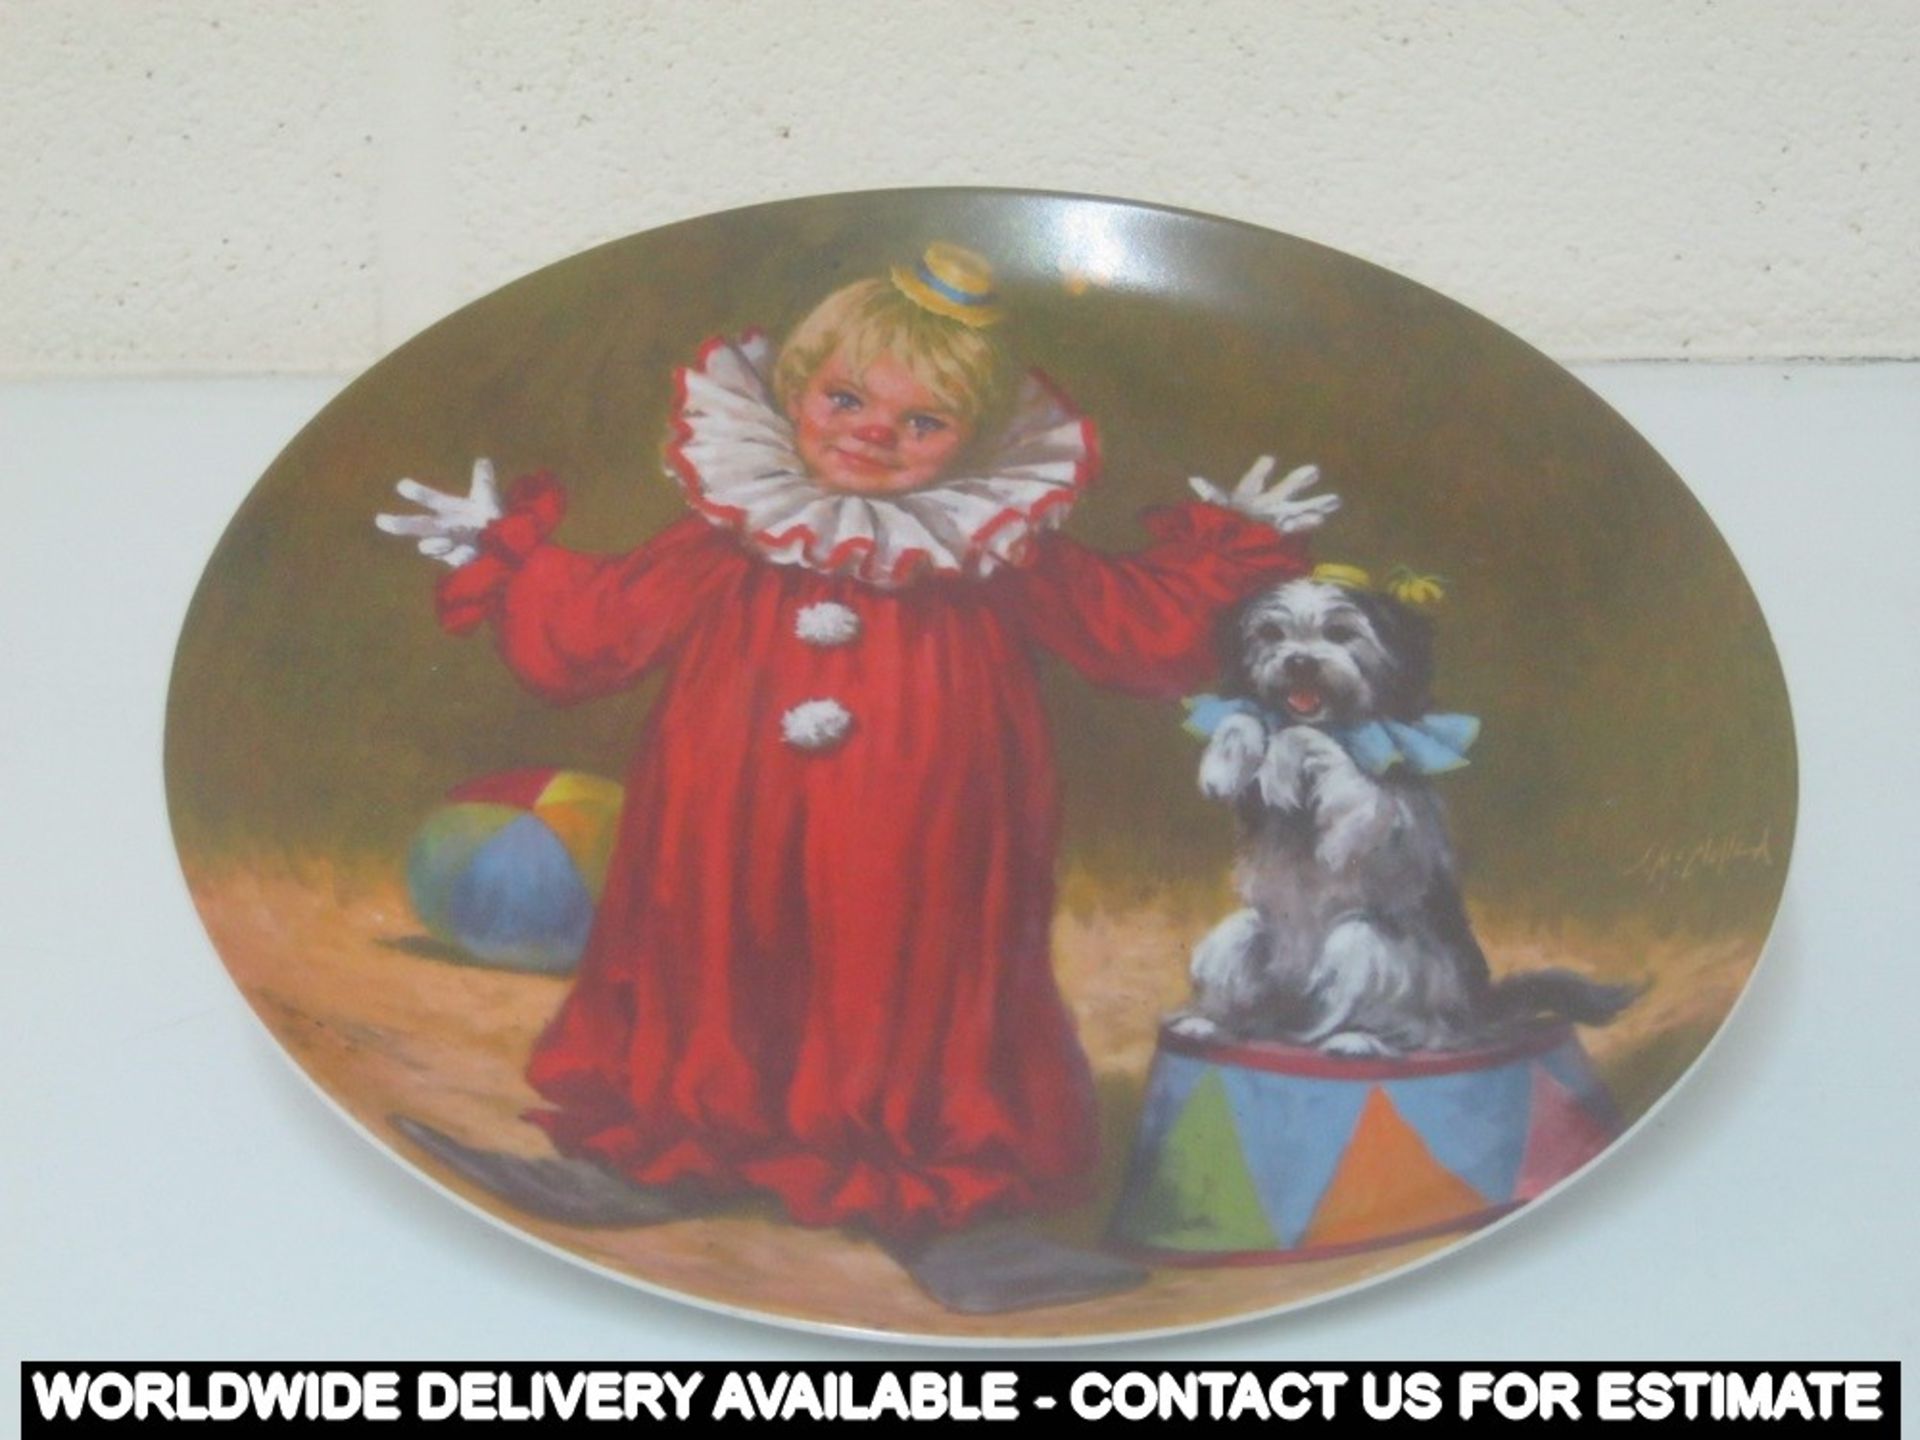 Knowles Reco 1982 McClelland "Childrens Circus" plate - Tommy the Clown